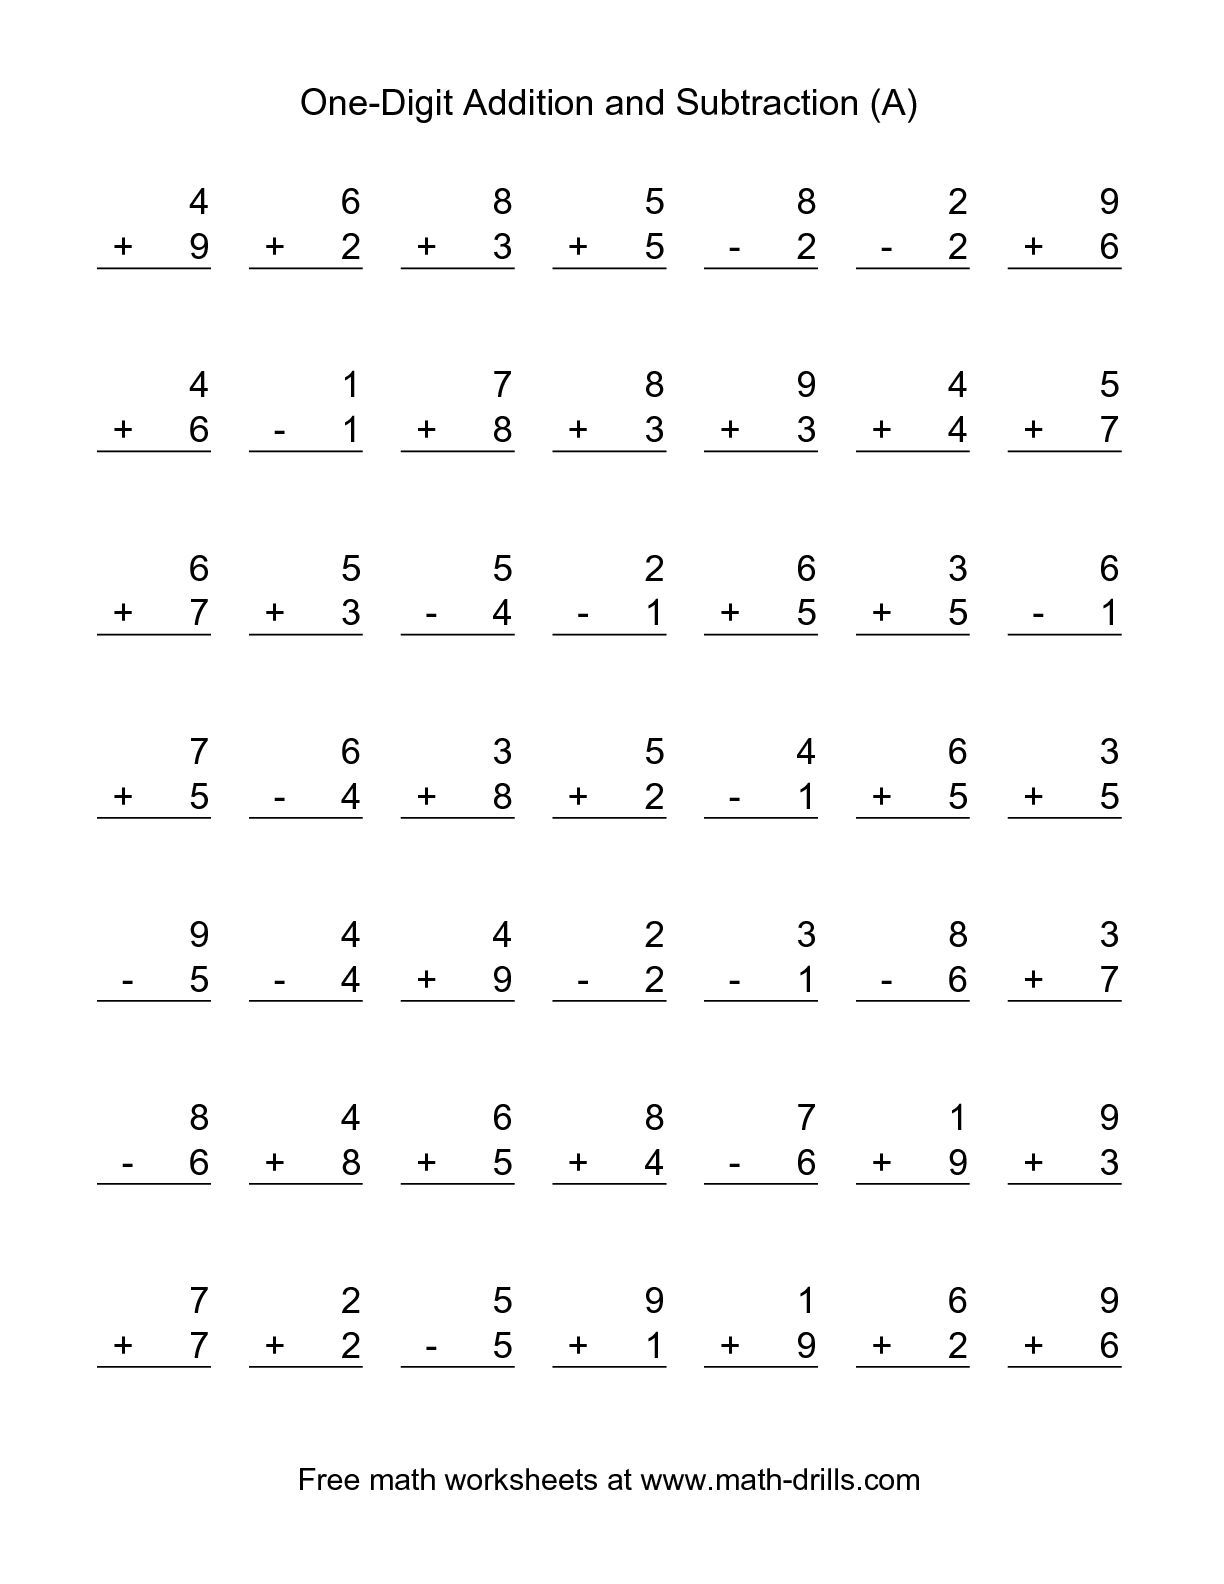 The Single-Digit (A) Math Worksheet From The Combined Addition And - Free Printable Addition And Subtraction Worksheets